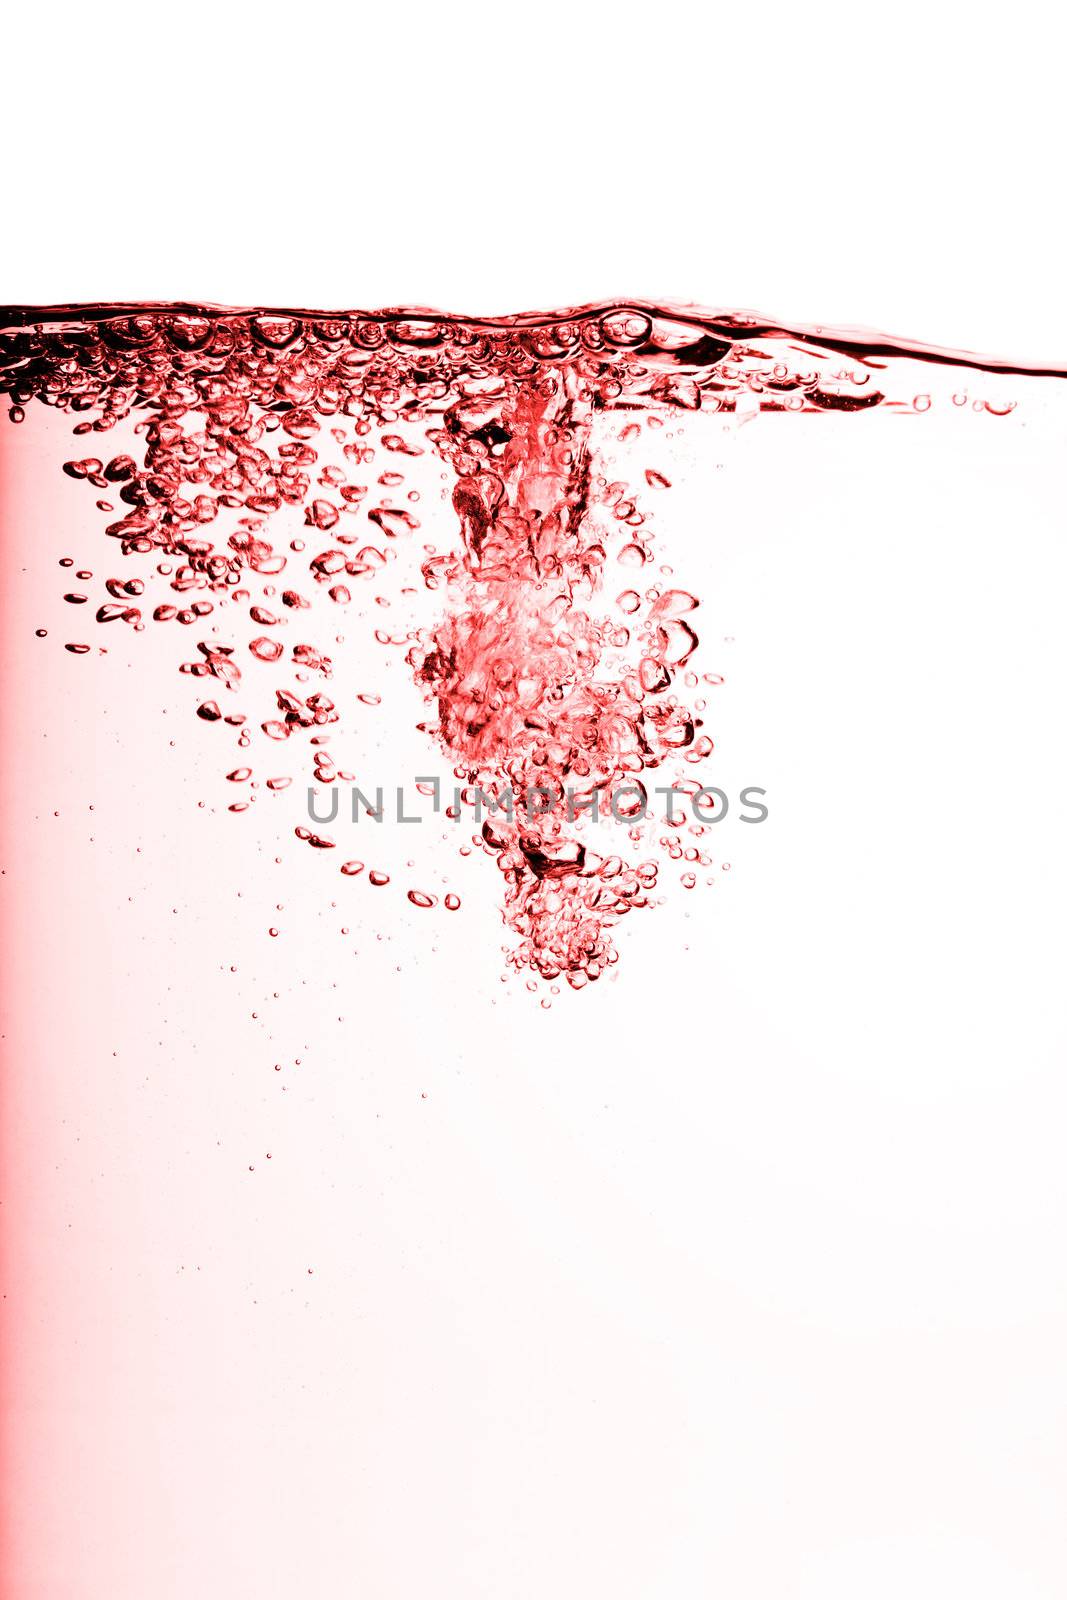 Red water background bubble texture